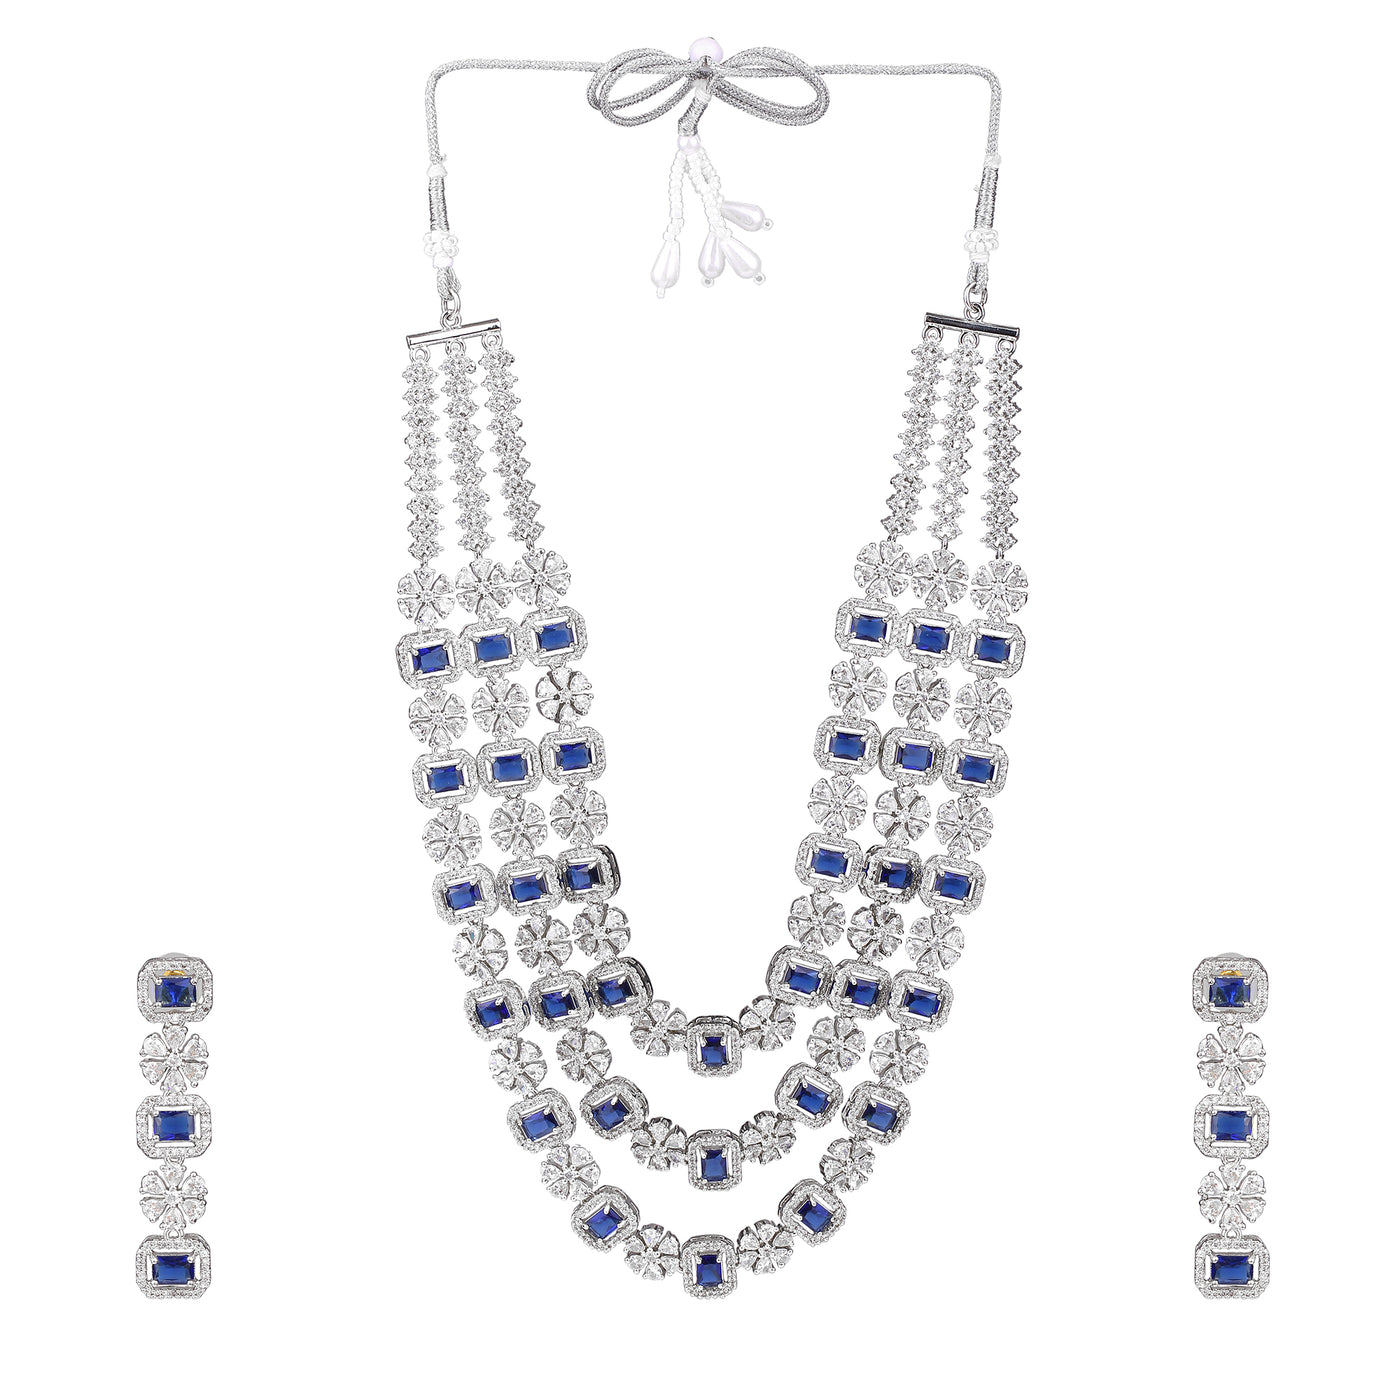 Estele Rhodium Plated CZ Astonishing Three Layered Necklace Set with Blue and White Crystals for Women